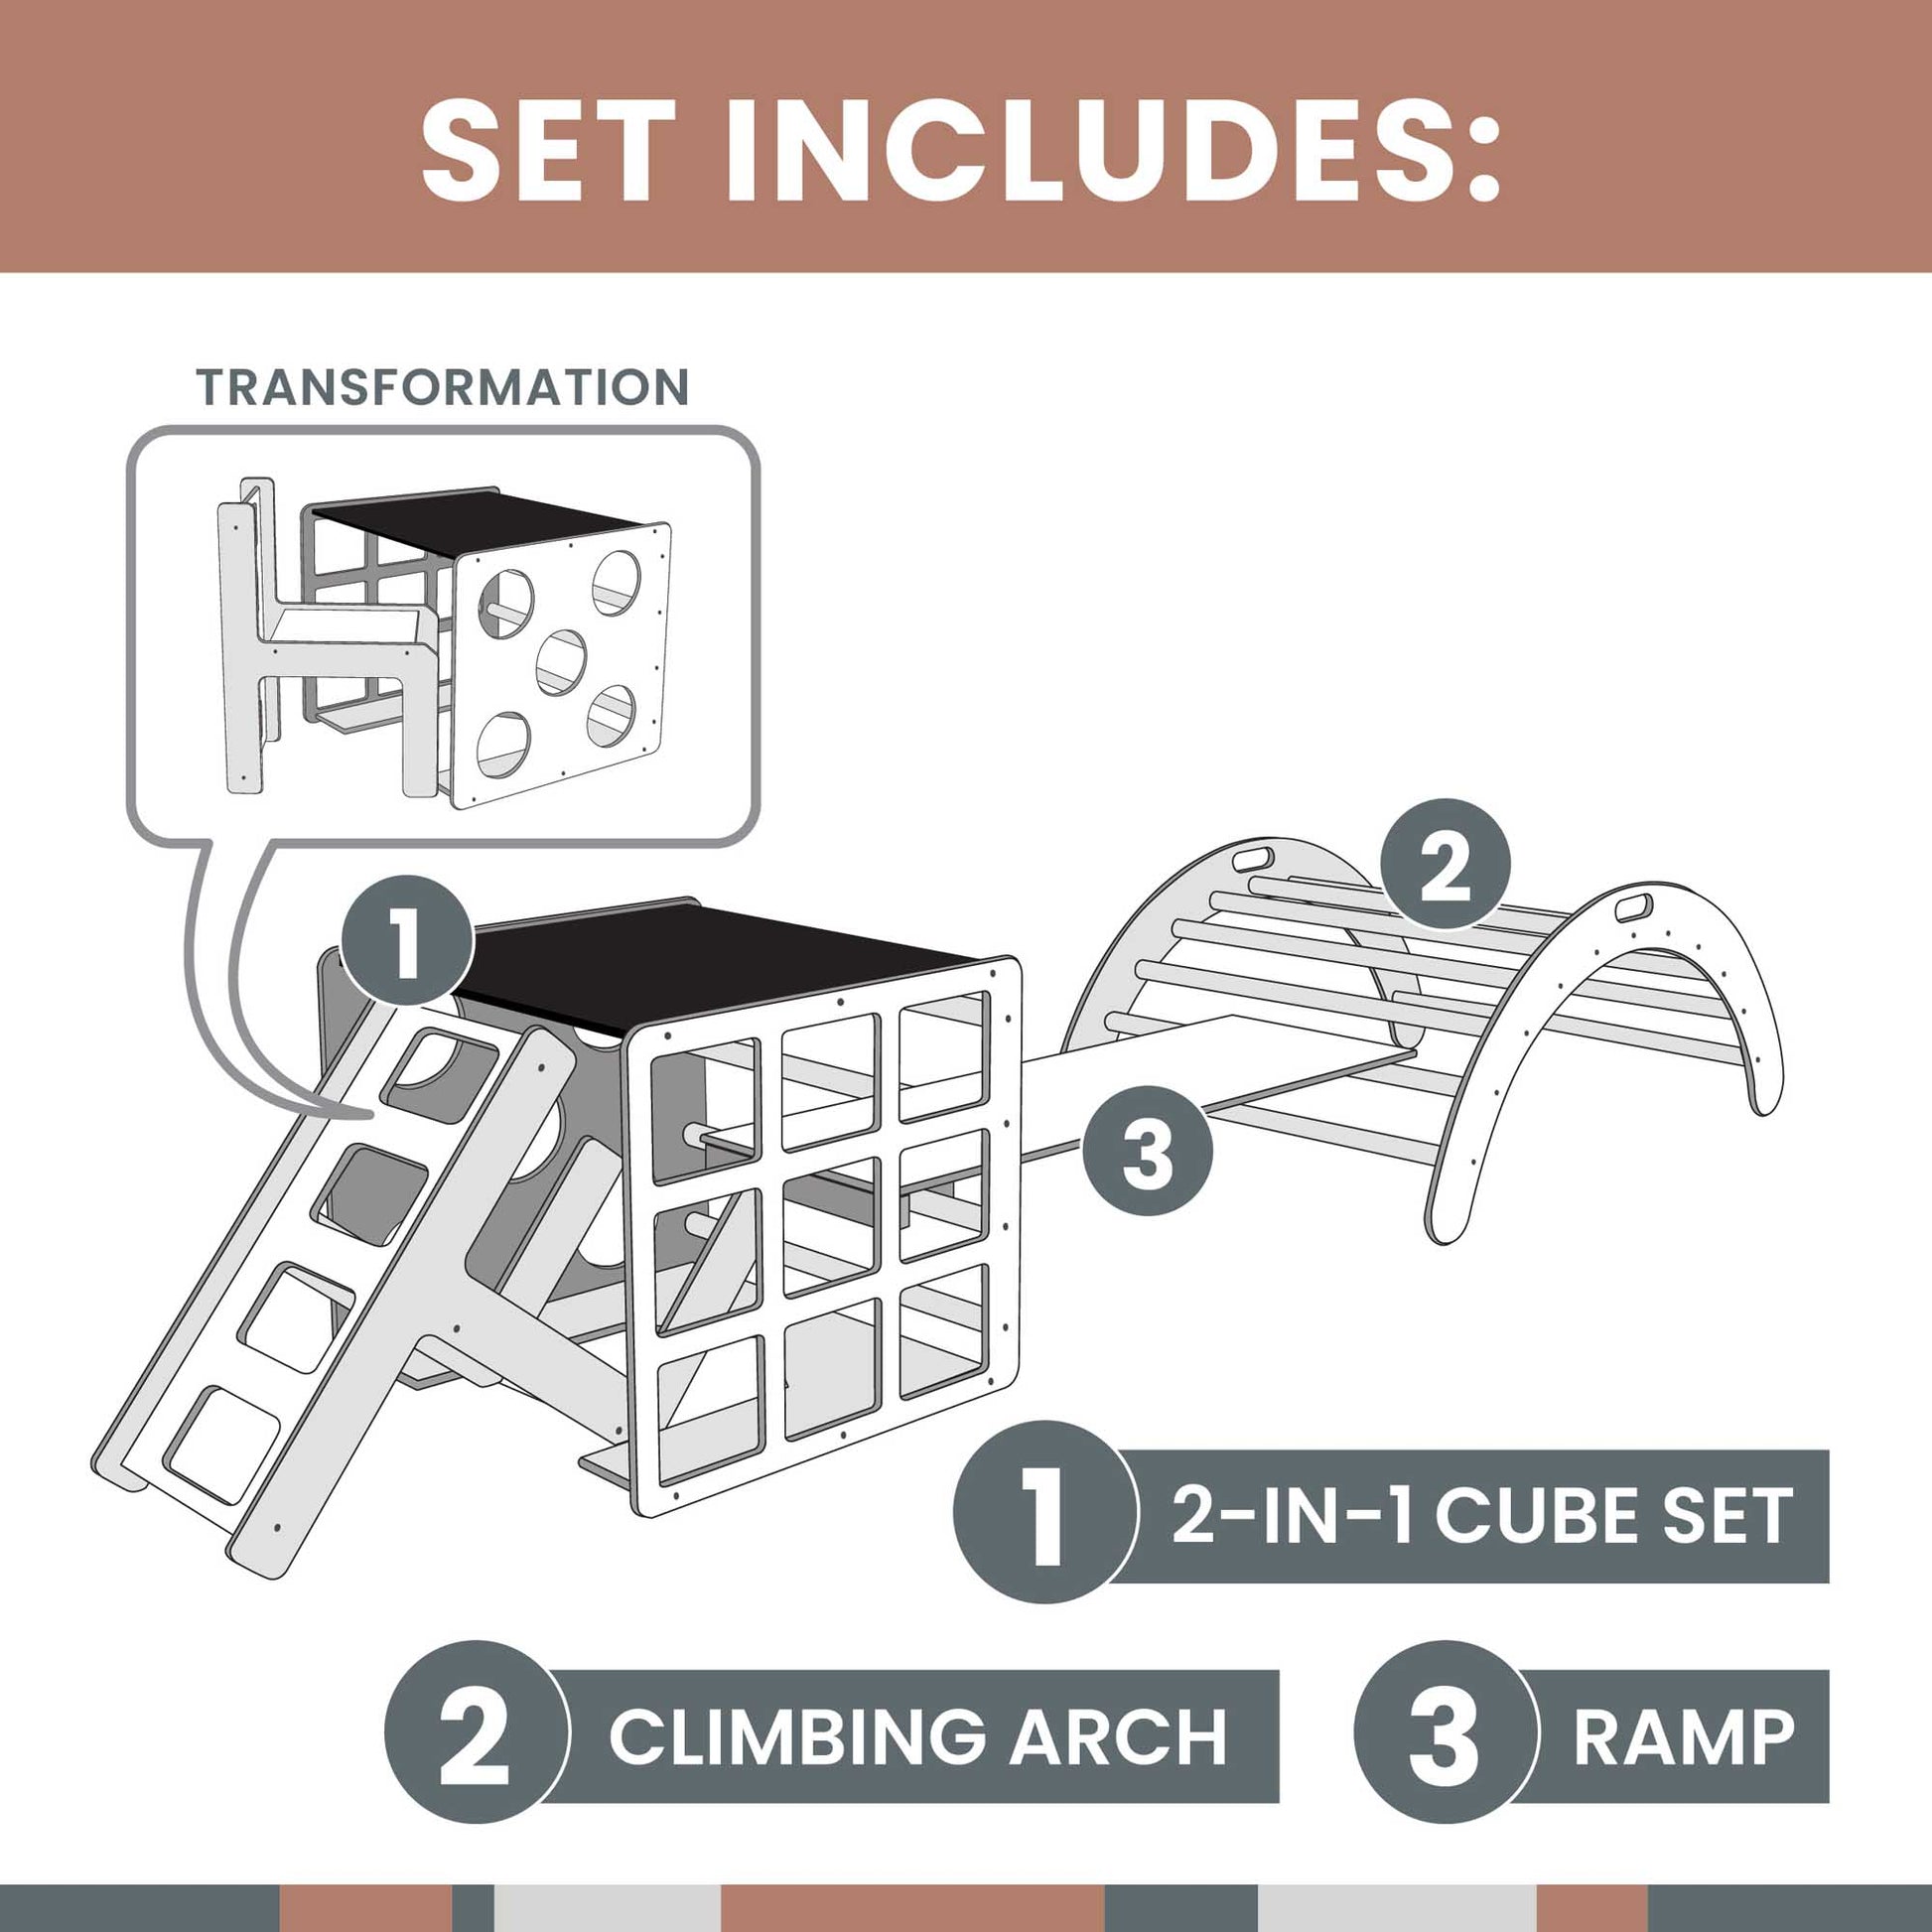 A set of instructions for how to build a Sweet Home From Wood Climbing Arch + Transformable Climbing Cube / Table and Chair + a Ramp.